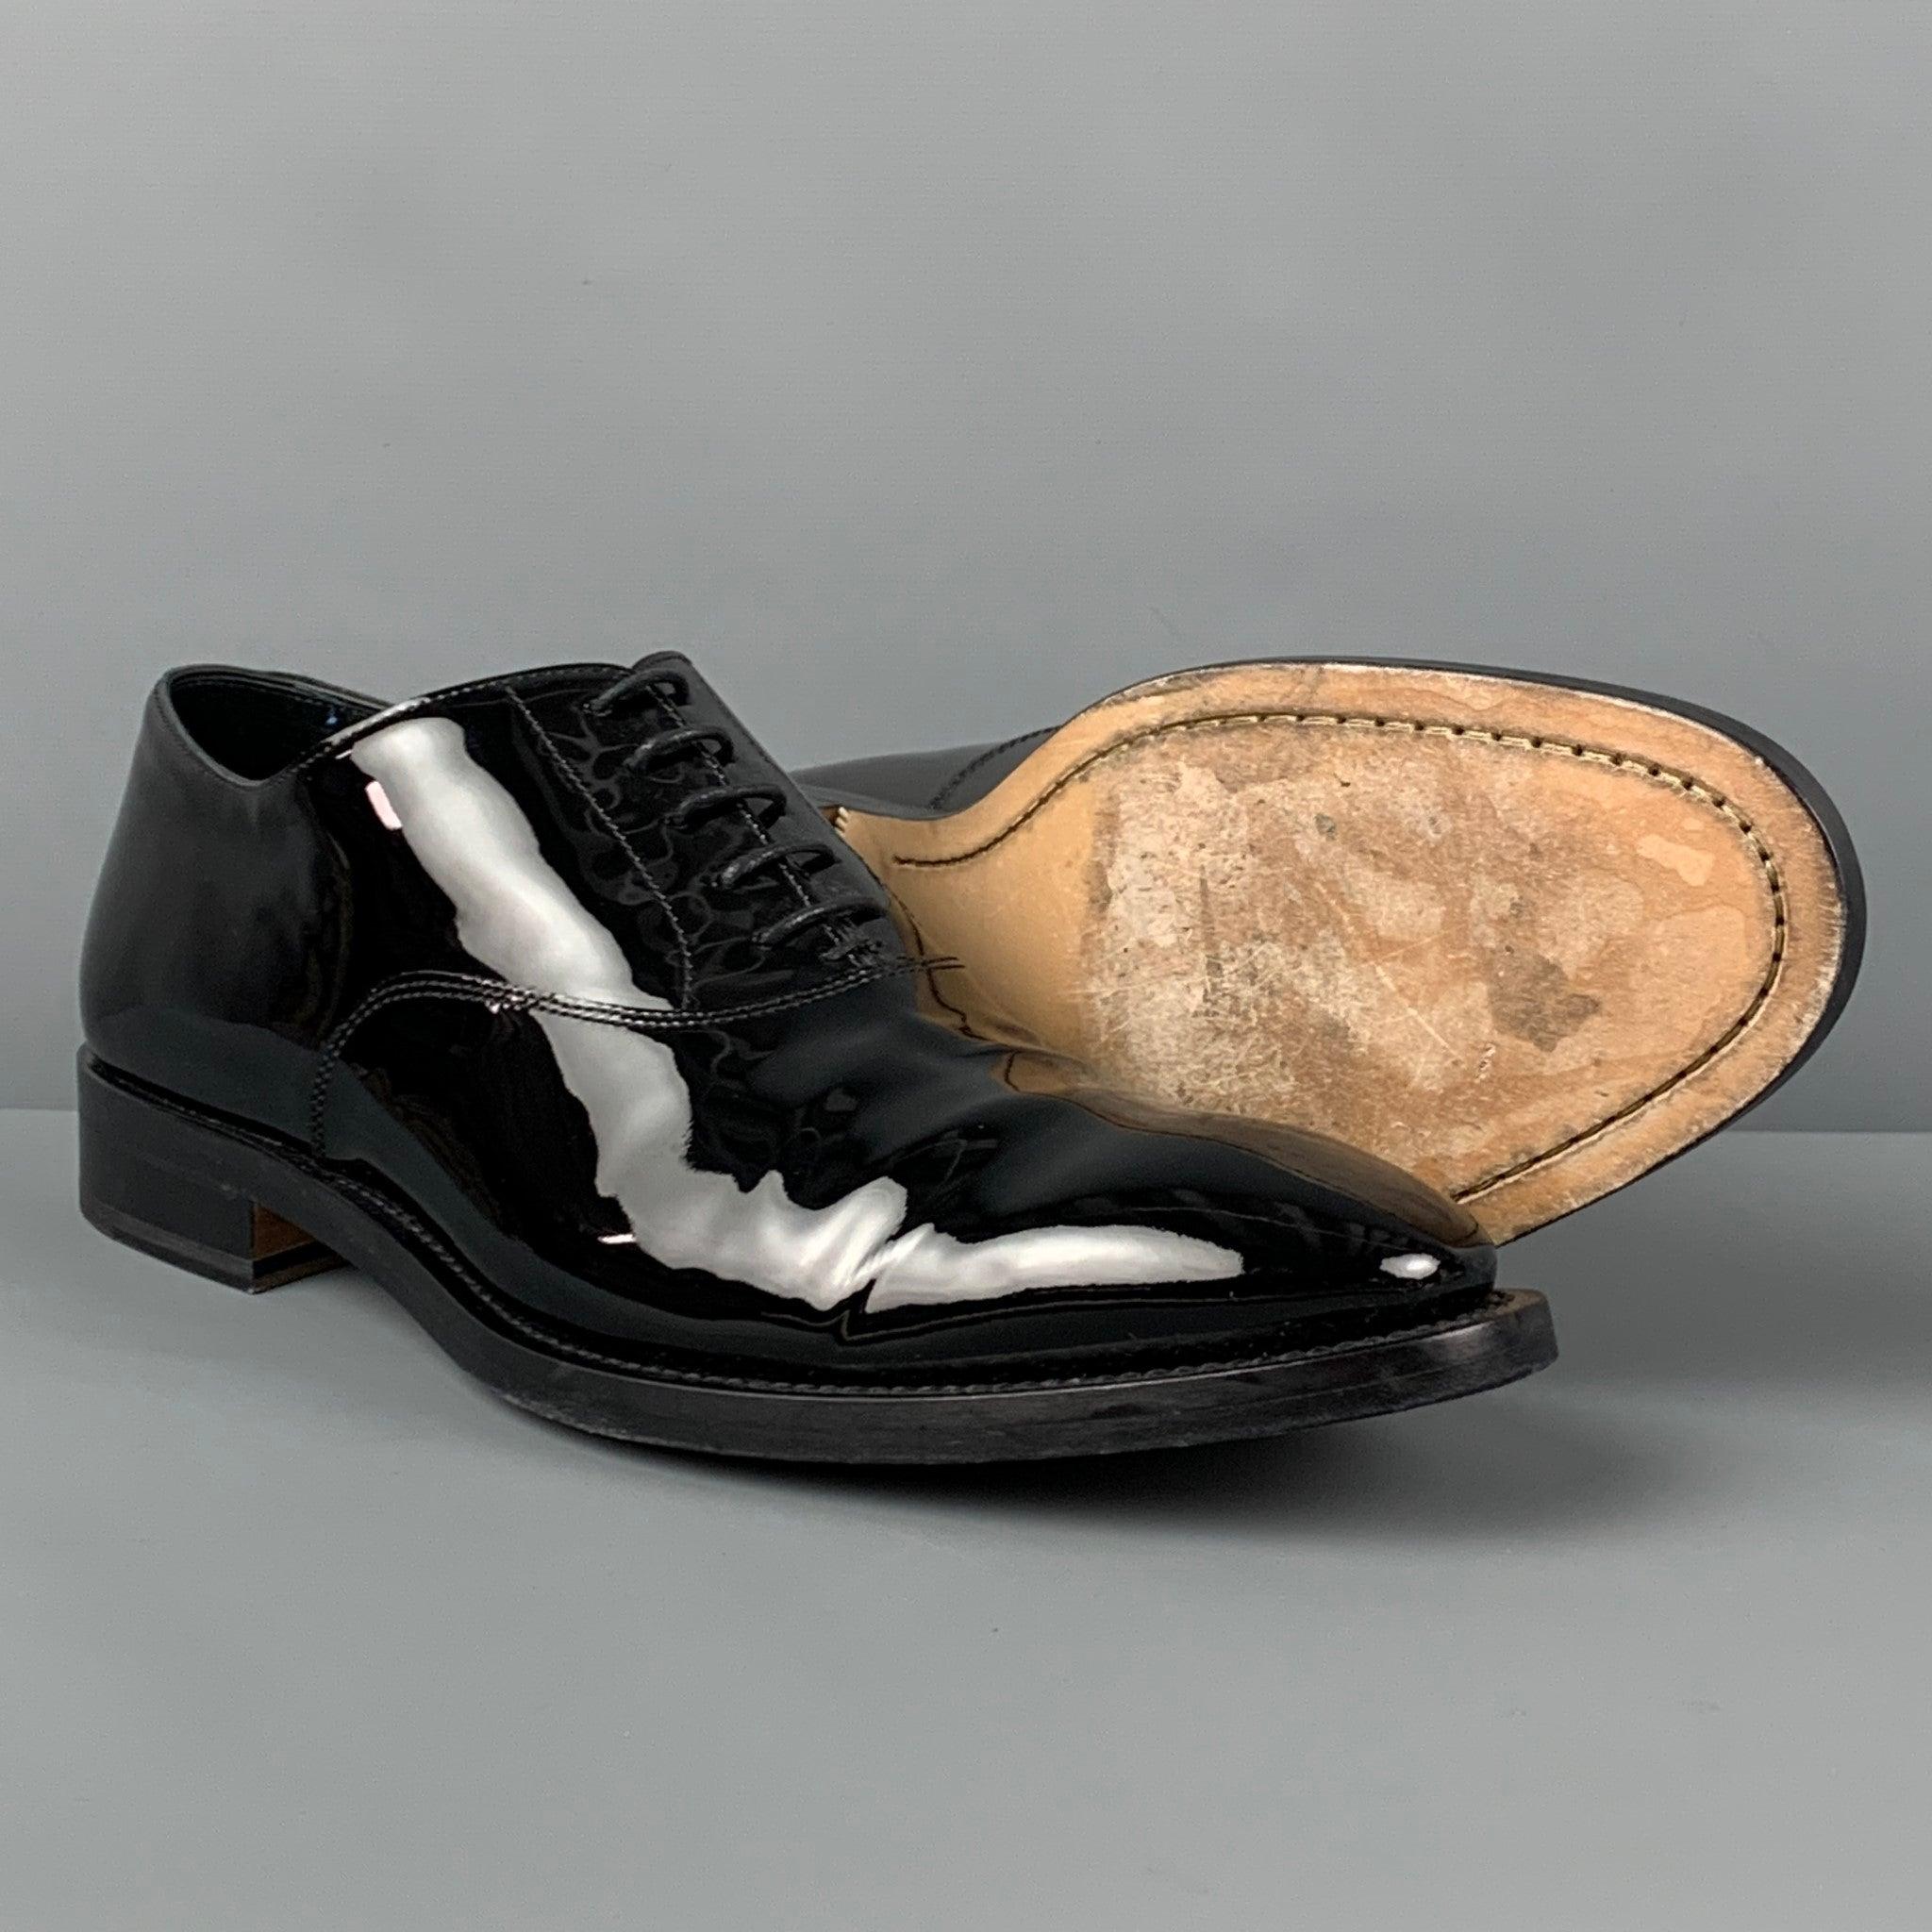 PAUL SMITH Size 10 Black Leather Lace Up Shoes In Good Condition For Sale In San Francisco, CA